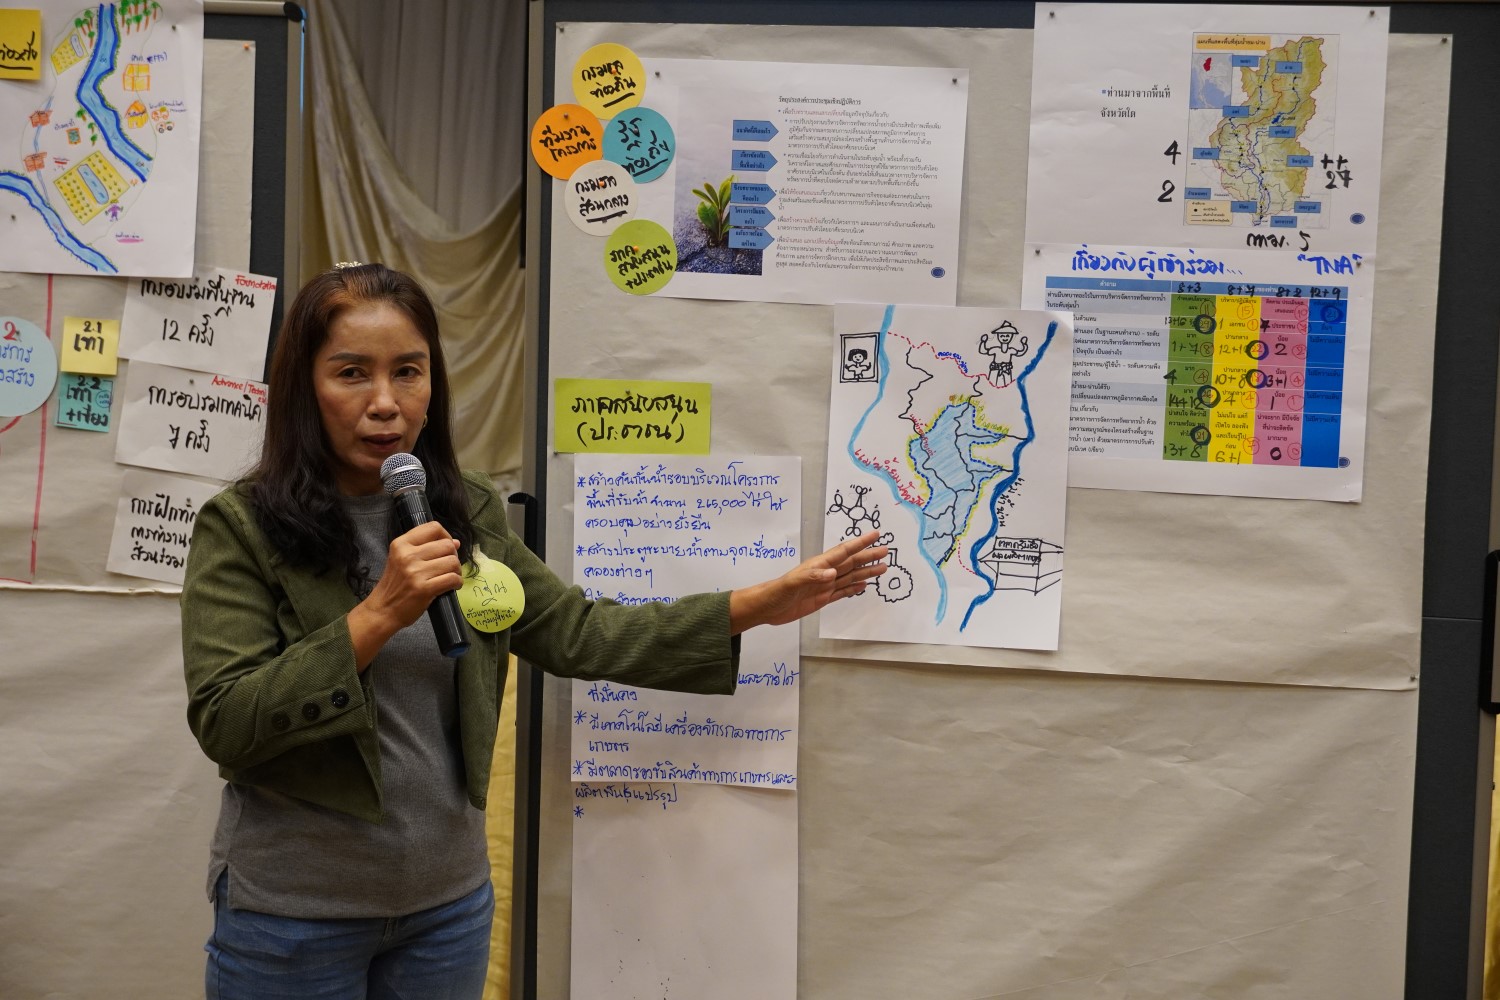 Katin Saengmee, a water user representative, presented a visionary image in the dream project of what could happen through the improvement of water resource management in the next 3 years.